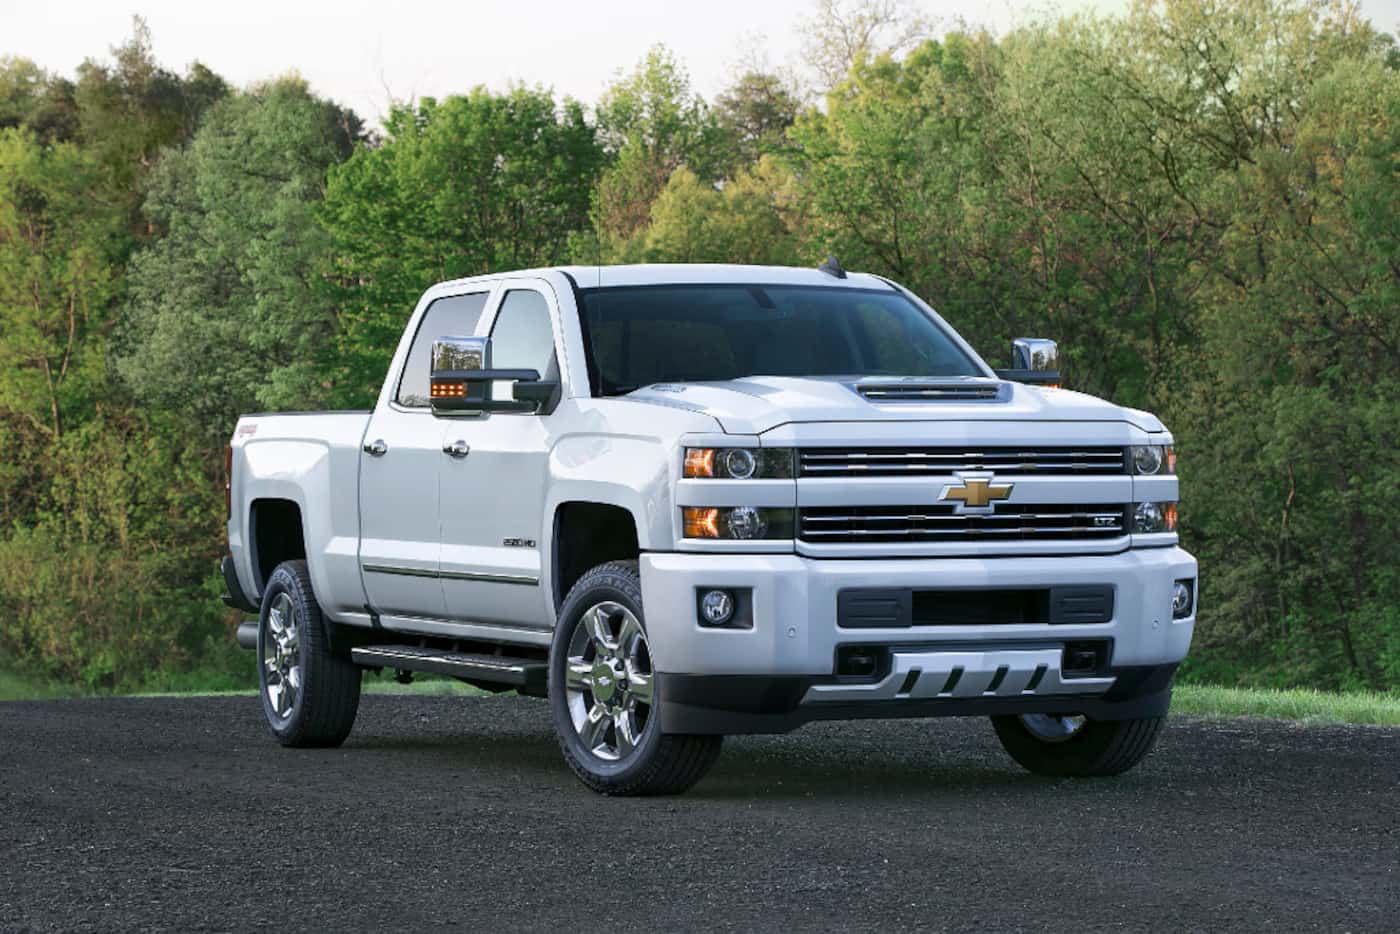 The 2017 Silverado 2500 HD is a serious work rig that gets about 17 miles per gallon.